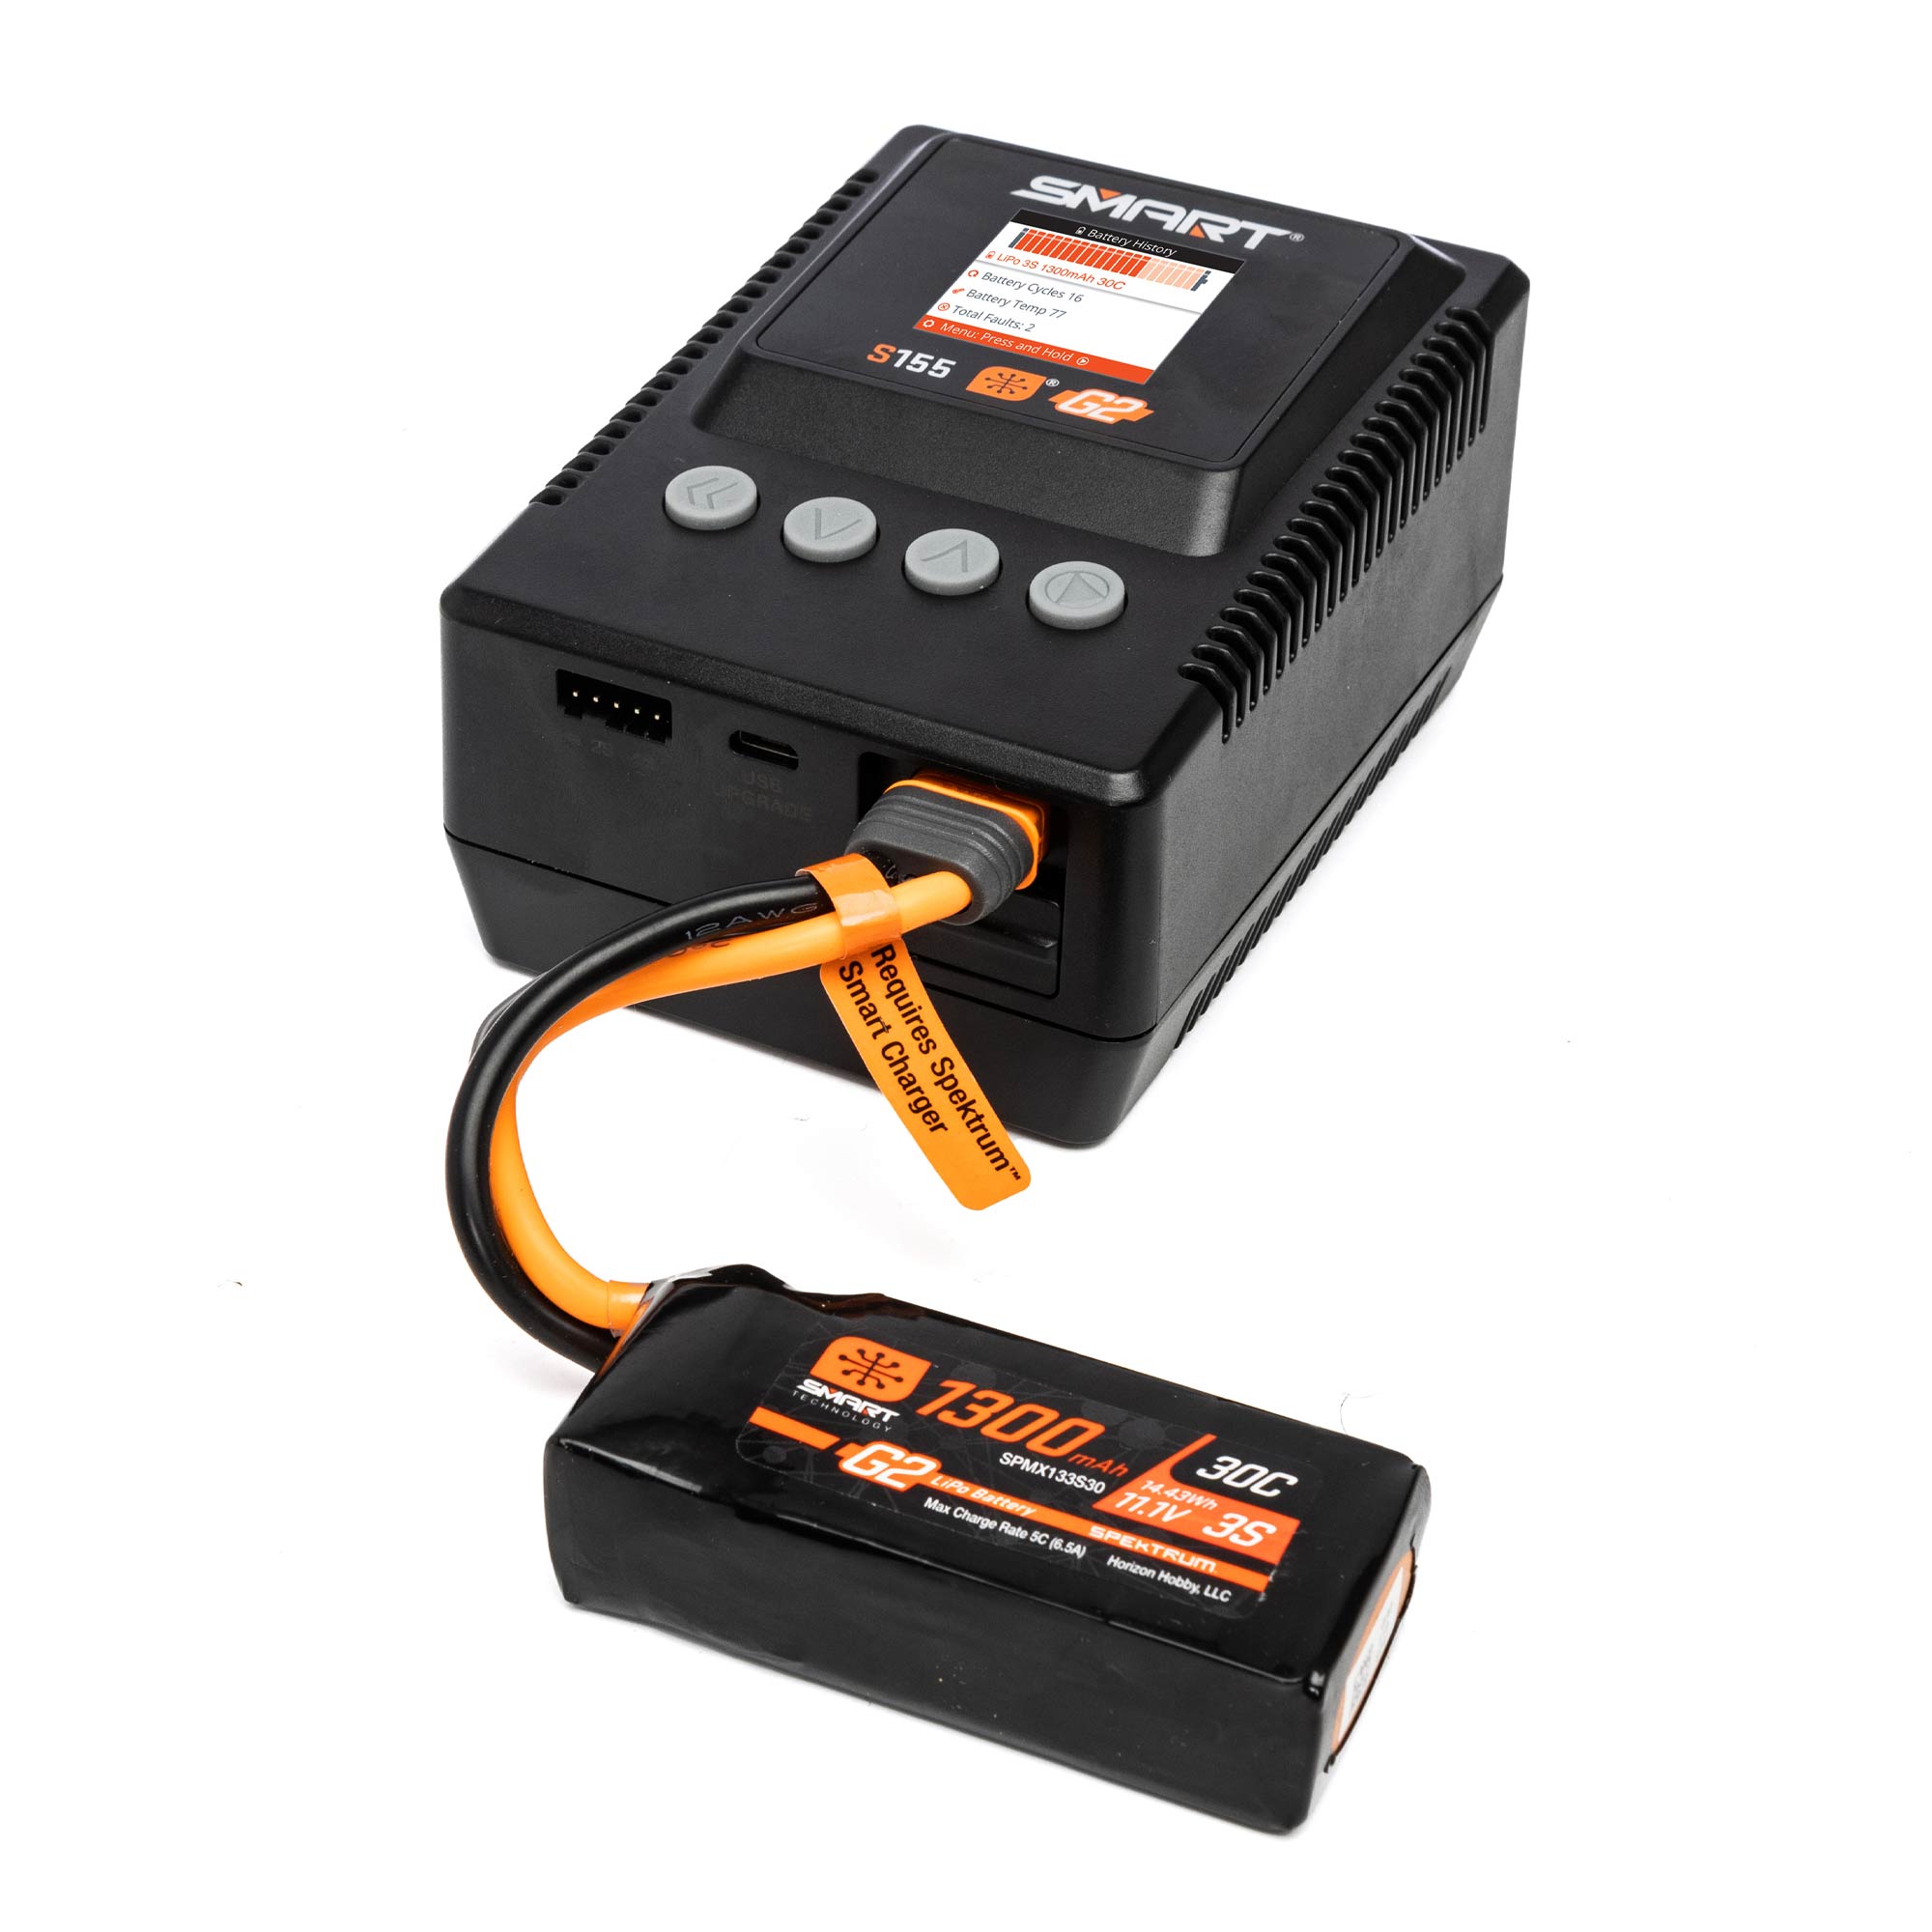 S155 55W AC G2 Smart Charger